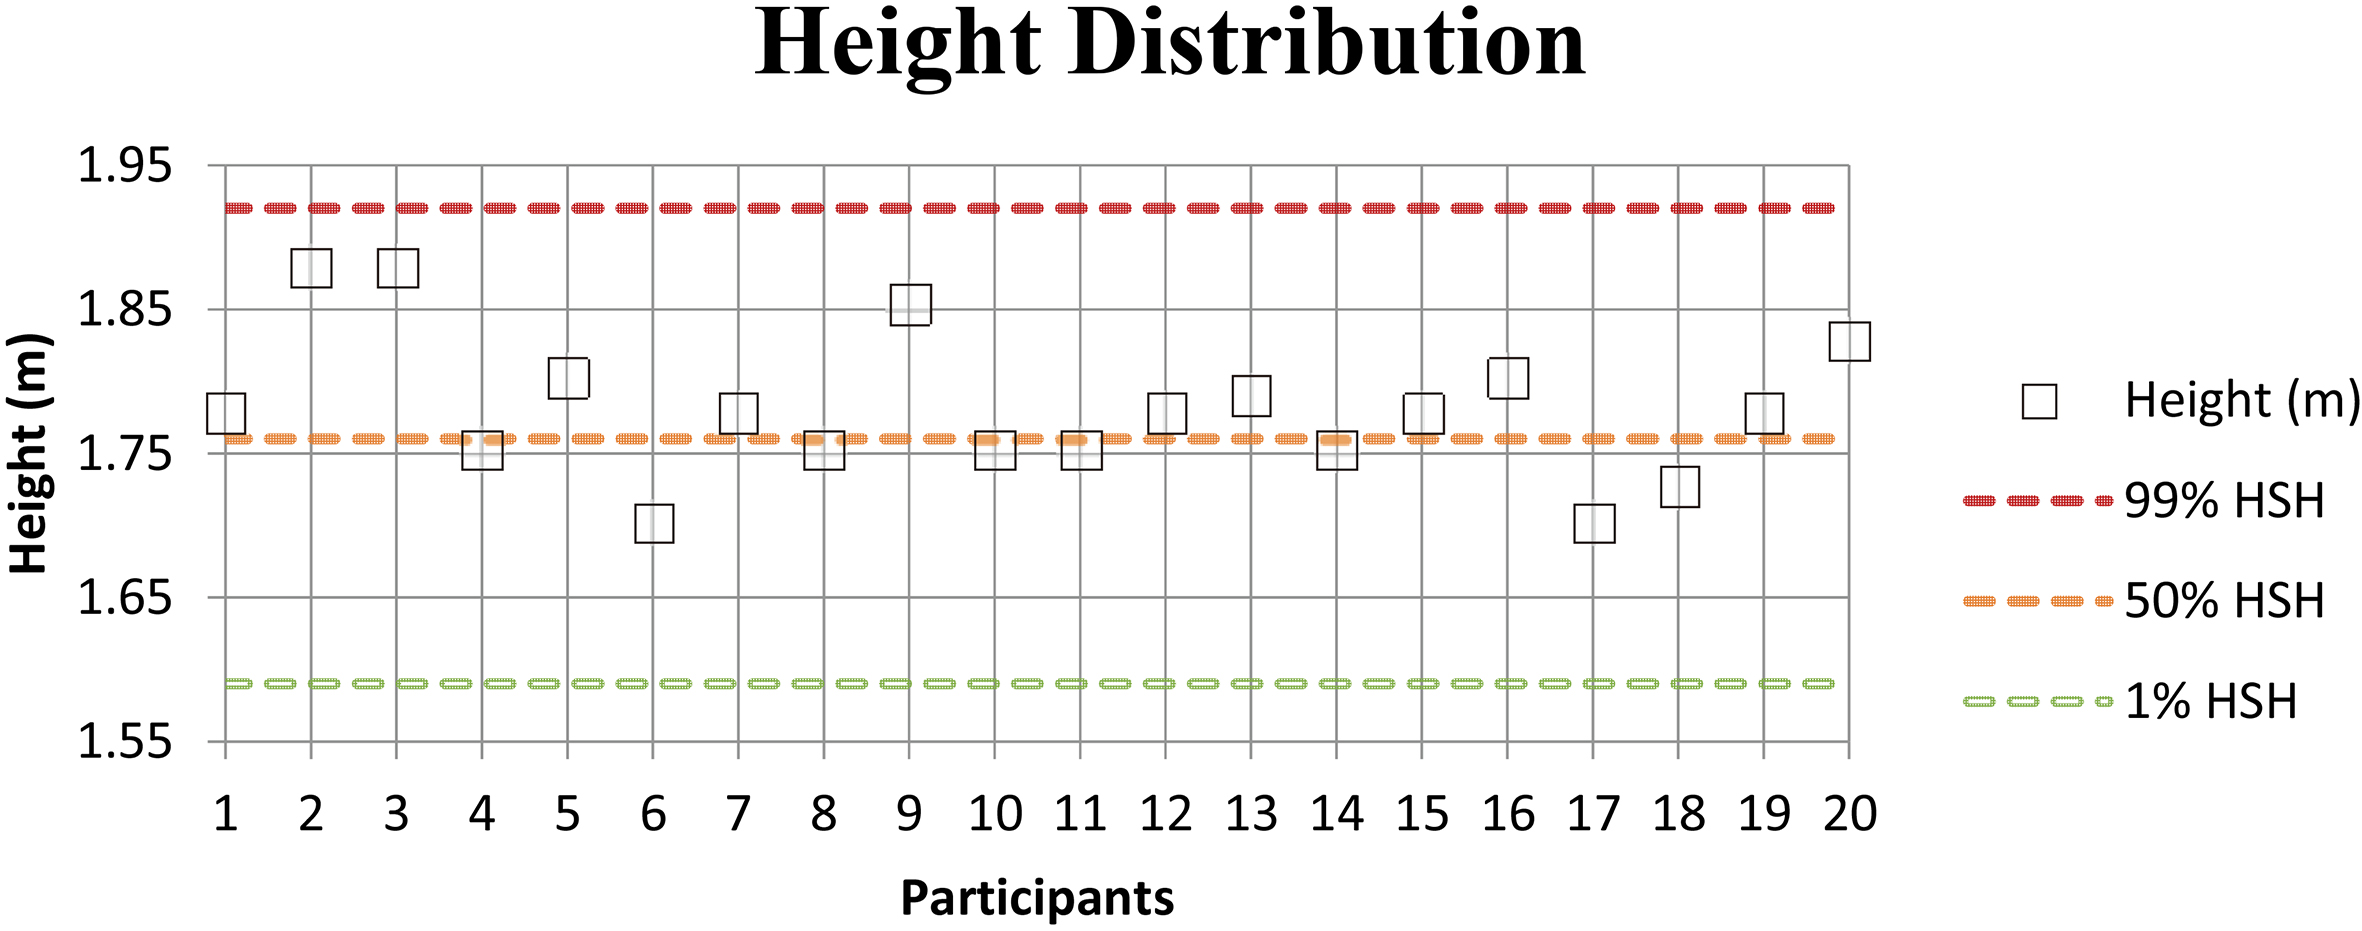 Height distribution of the participants. Height of all the participants compared to “The measure of man and woman” [20] where the green line represent the 1st percentile of the population, the yellow line the 50th percentile and the red line the 99th percentile.